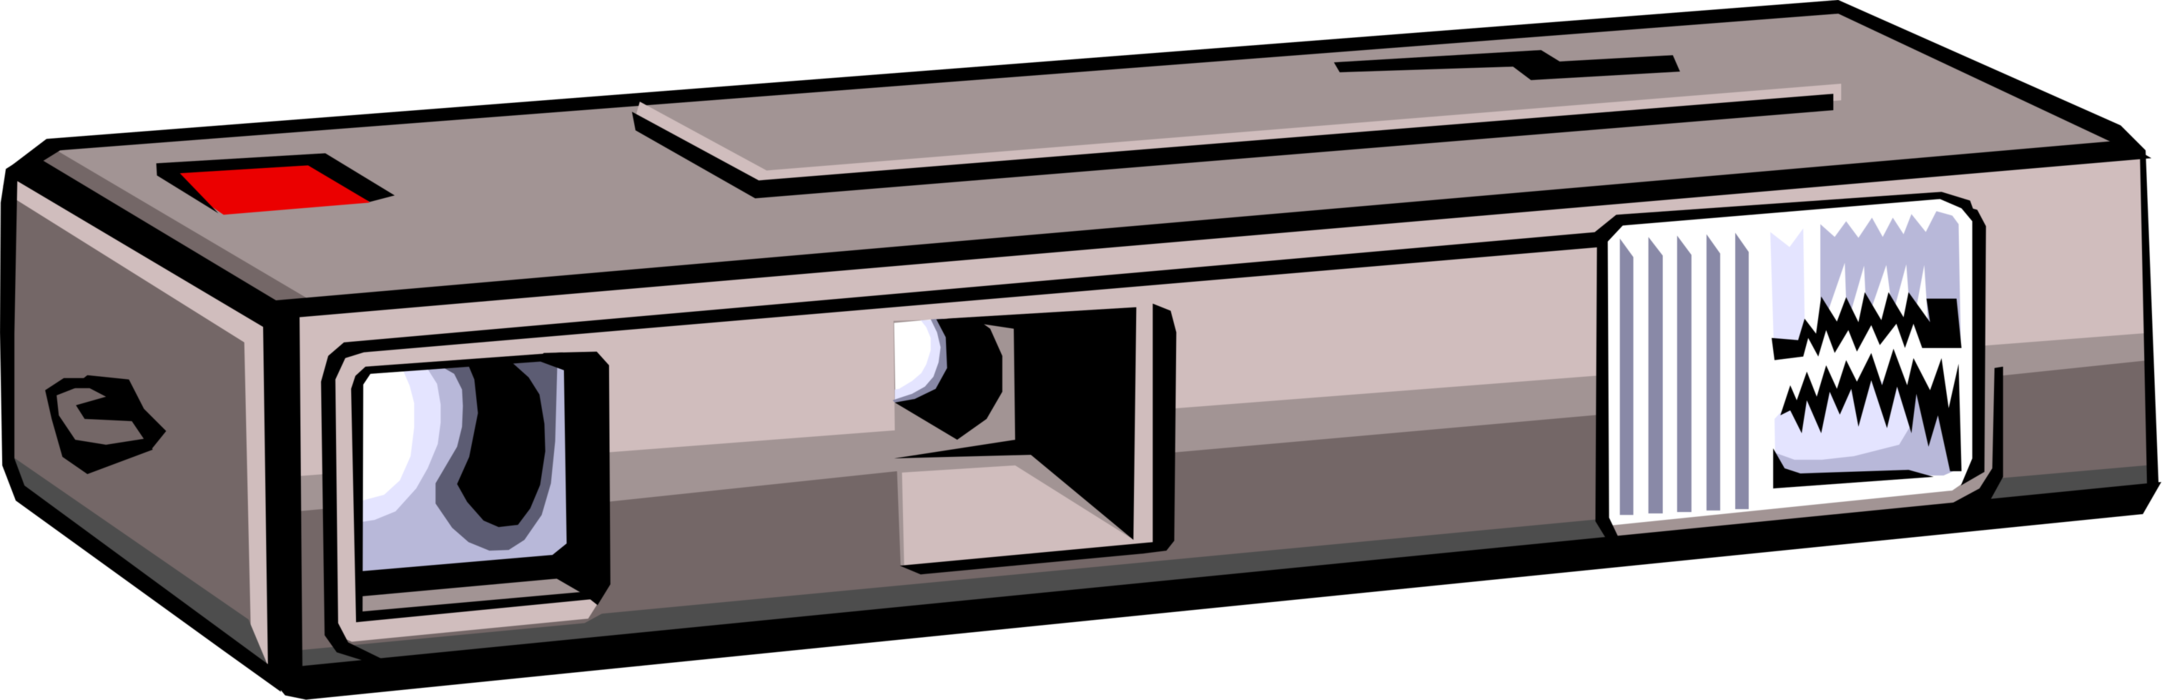 Vector Illustration of Miniature Compact Photography Camera